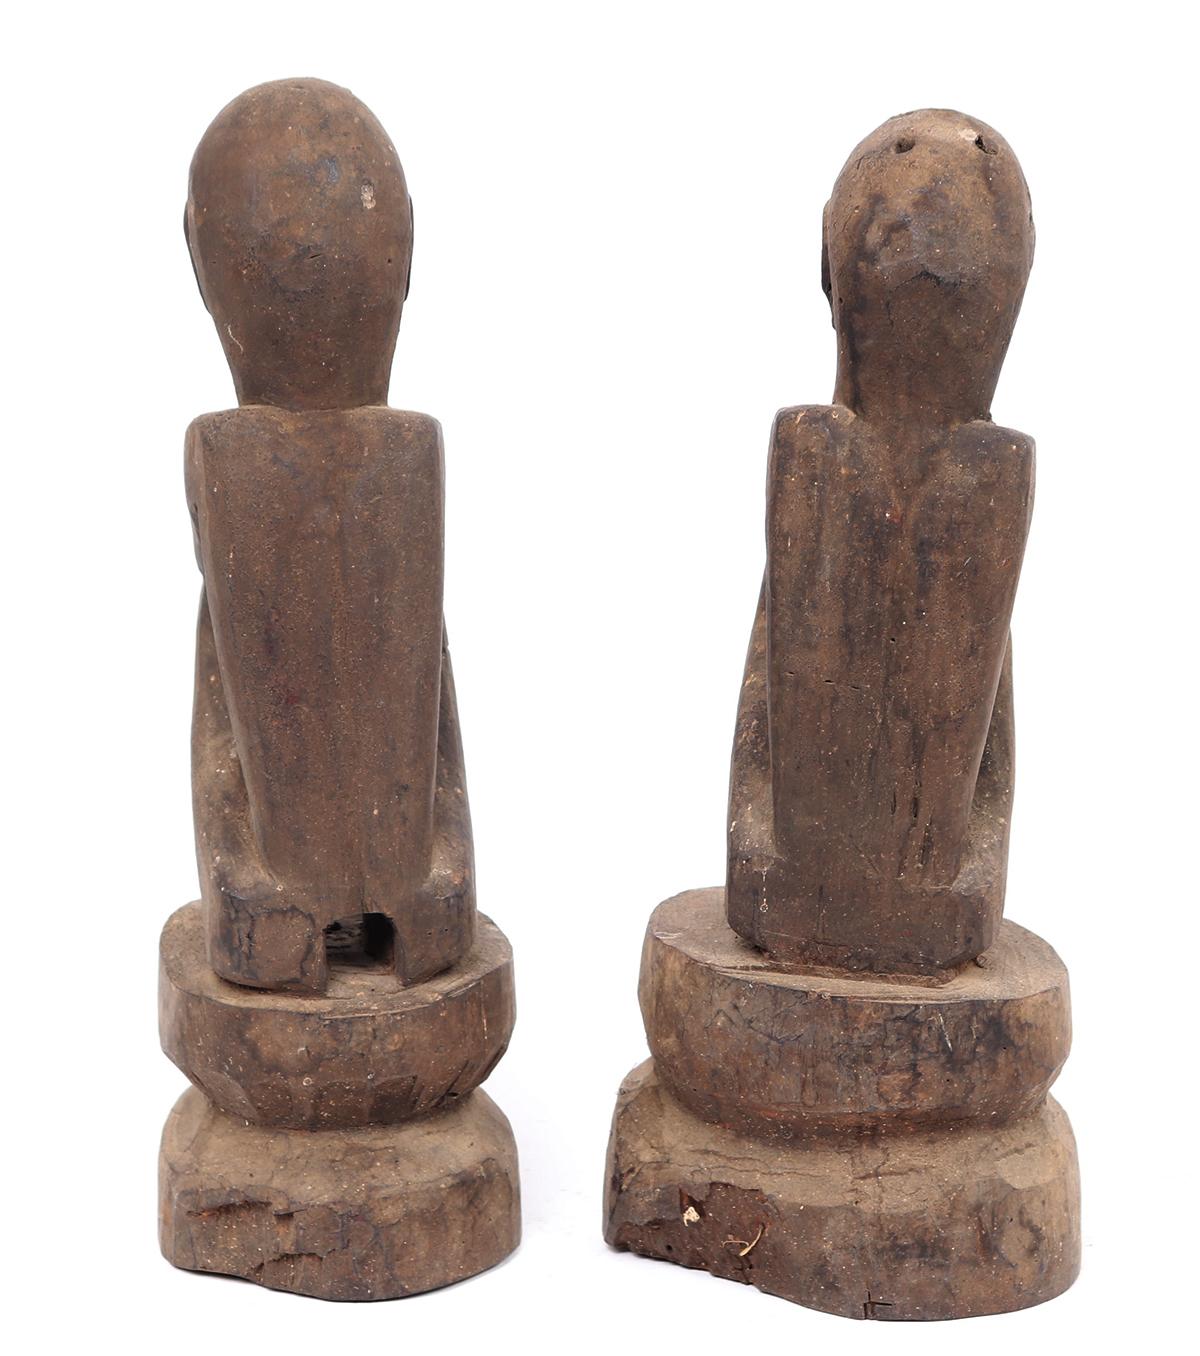 Pair of Wood Carved Philippines Rice Gods, Seated Bulul